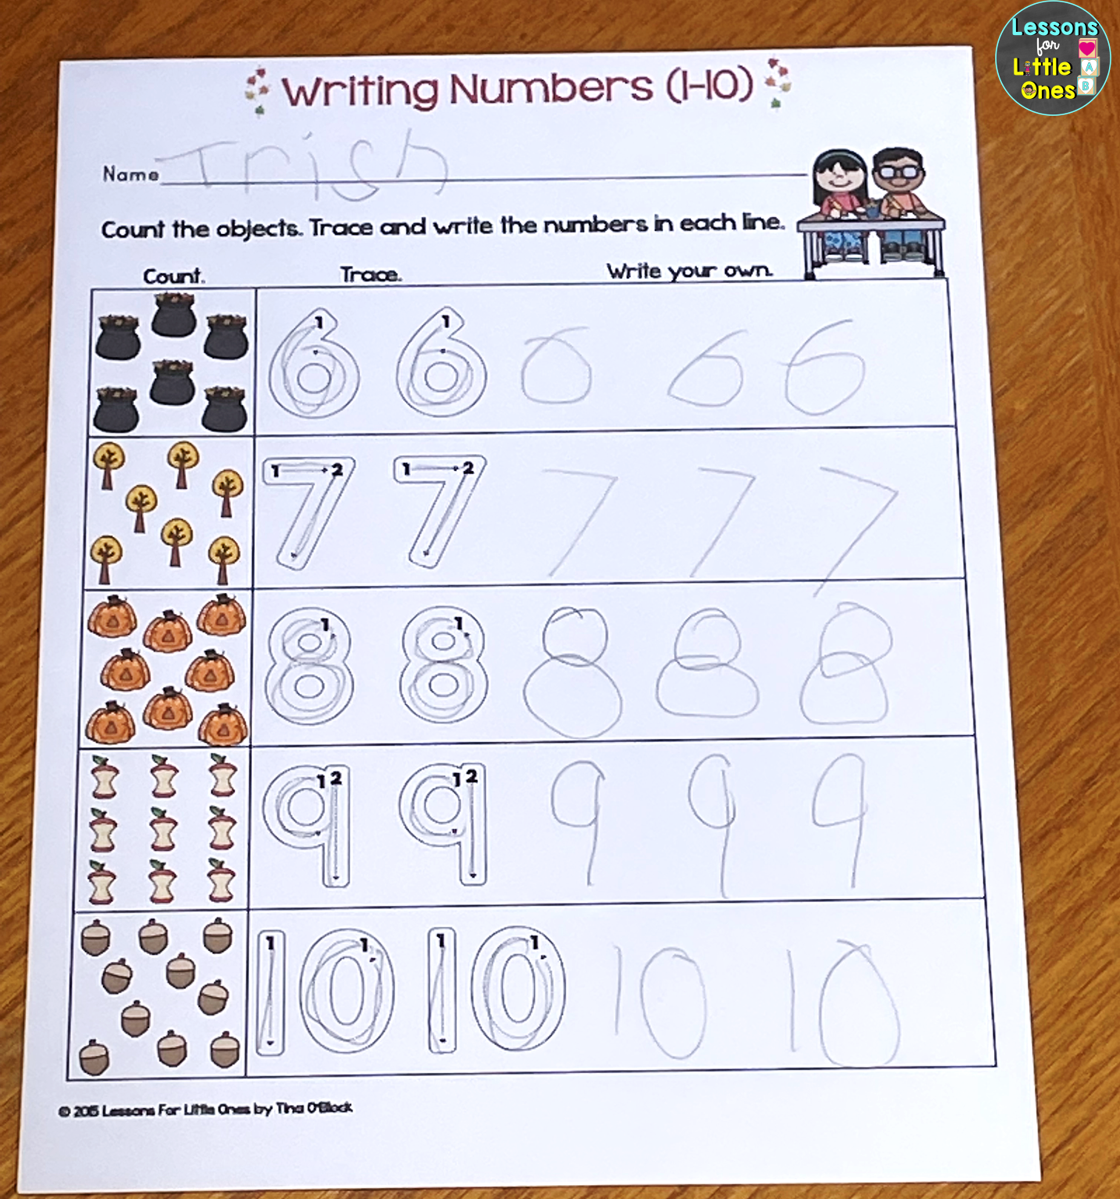 writing numbers page for numbers 1-10